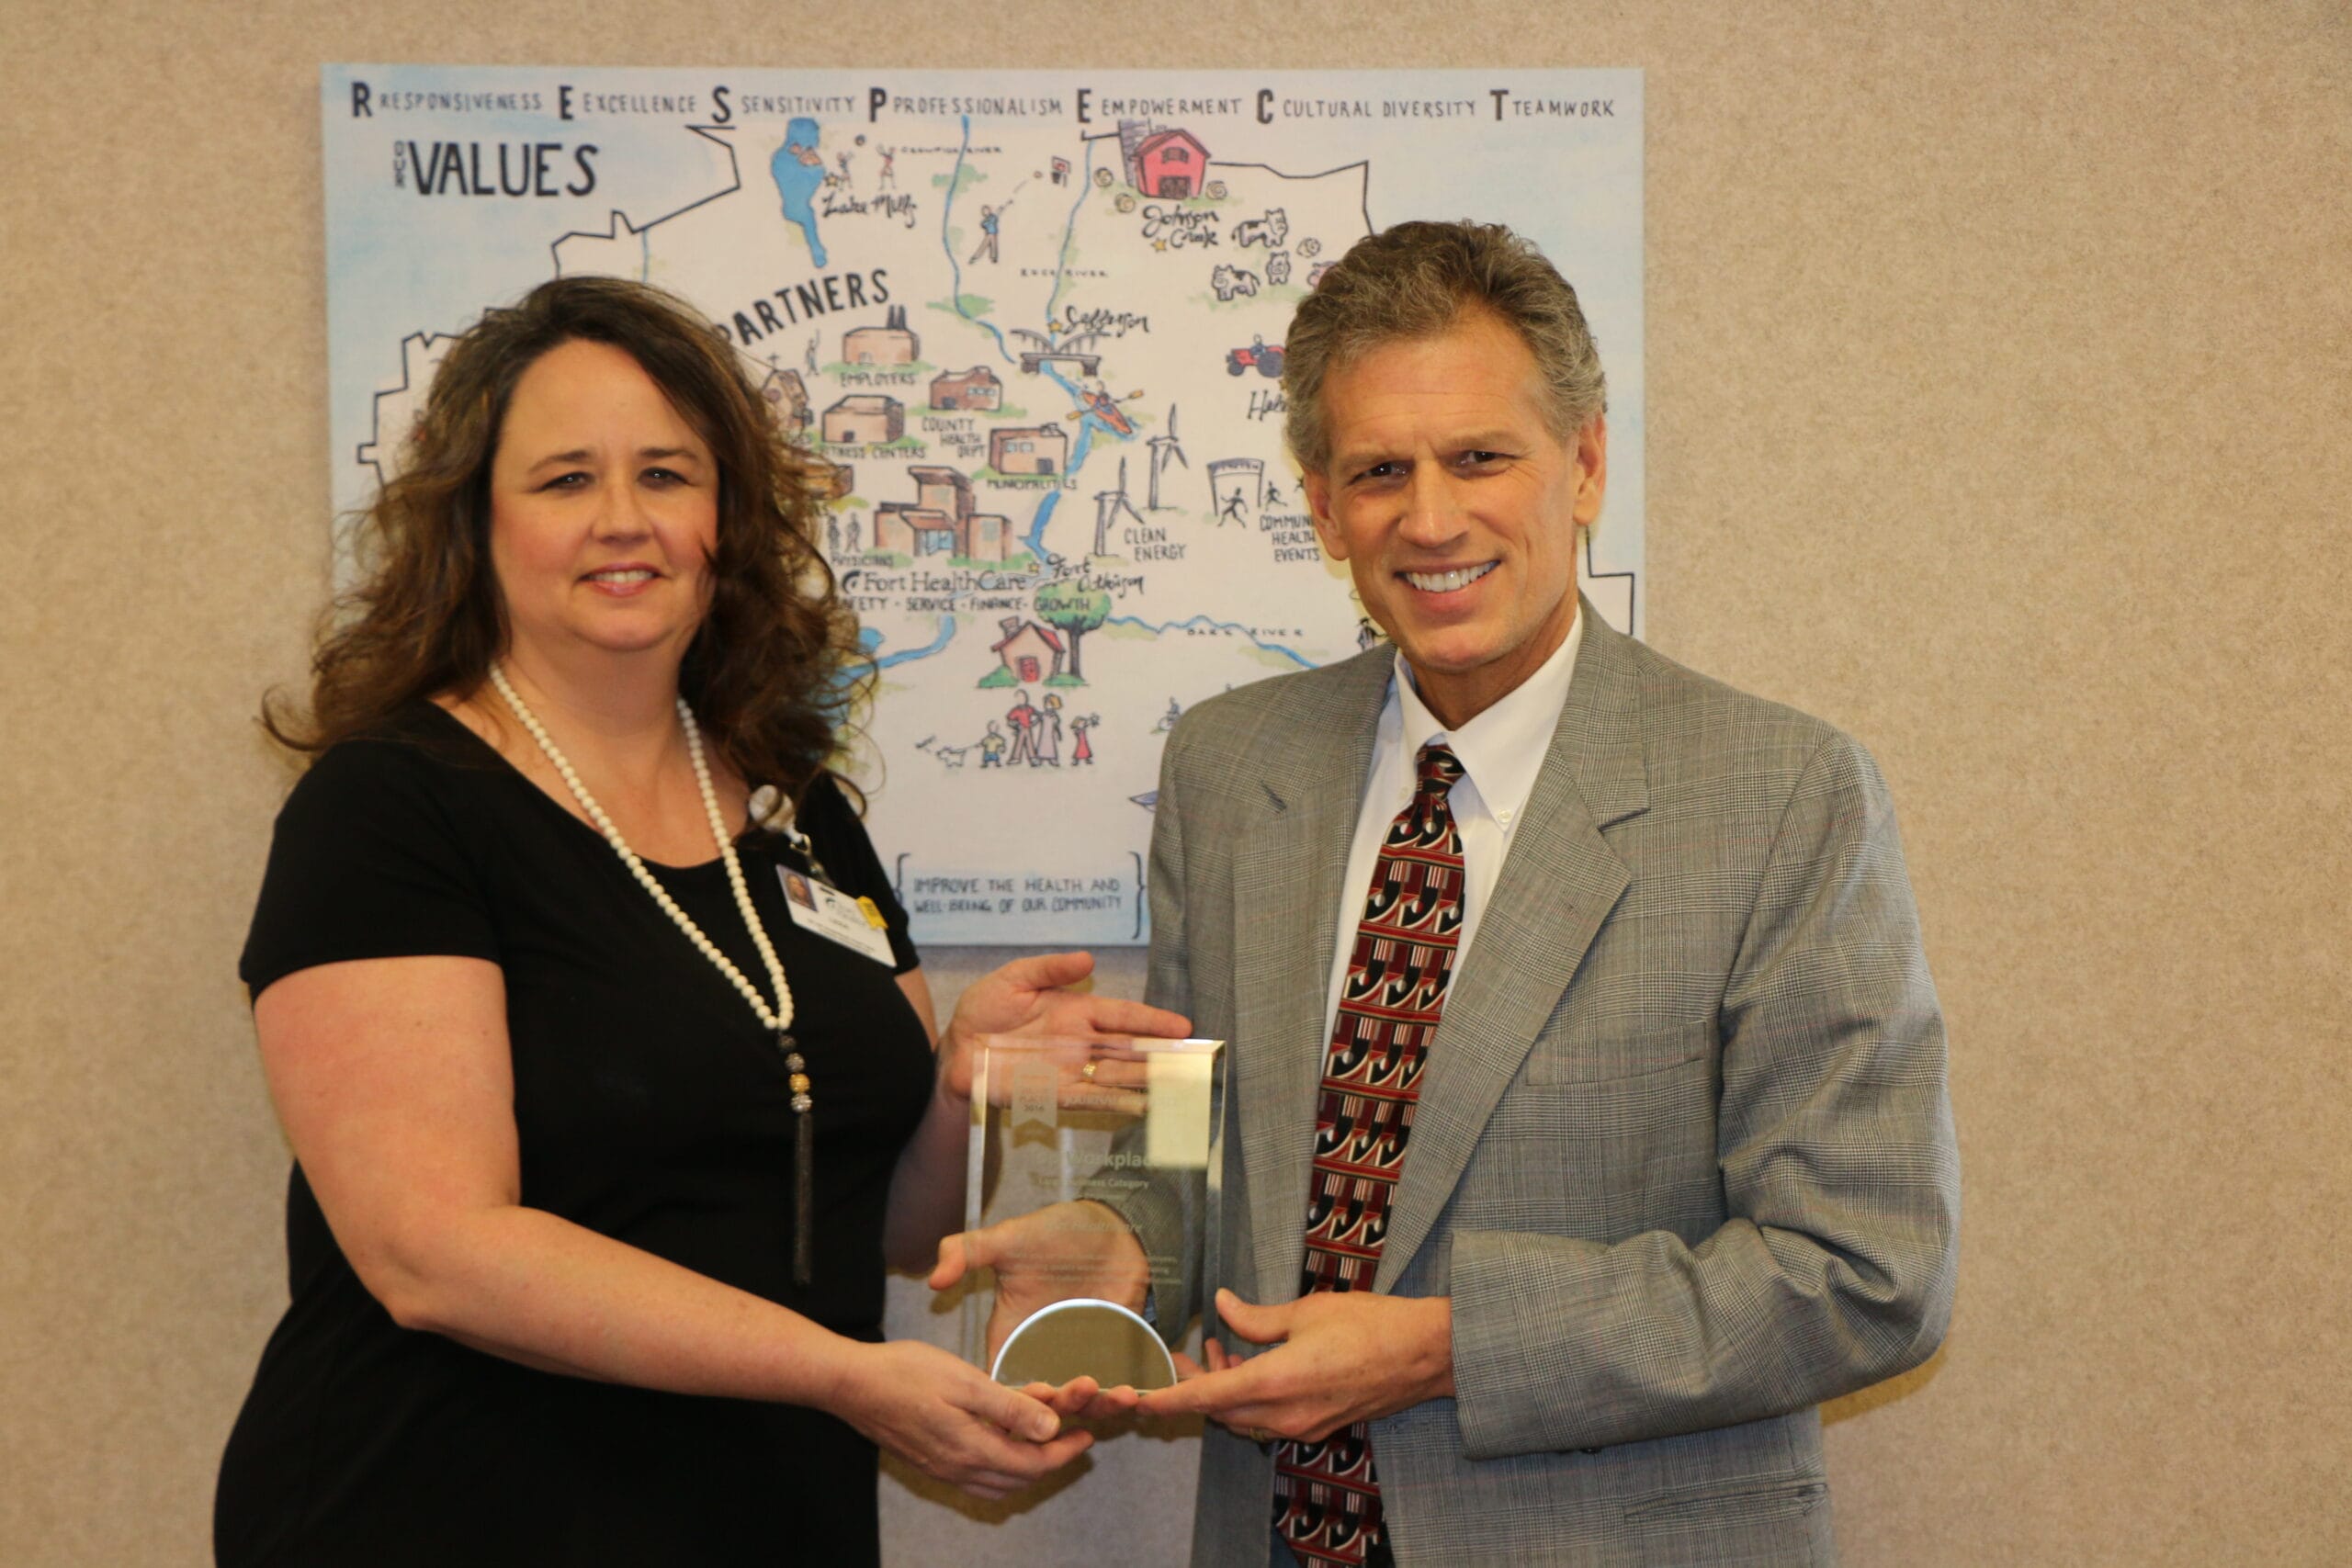 Lesa Radloff, Senior Human Resource Business Partner  presents Mike Wallace, CEO of Fort HealthCare with the 2016 award